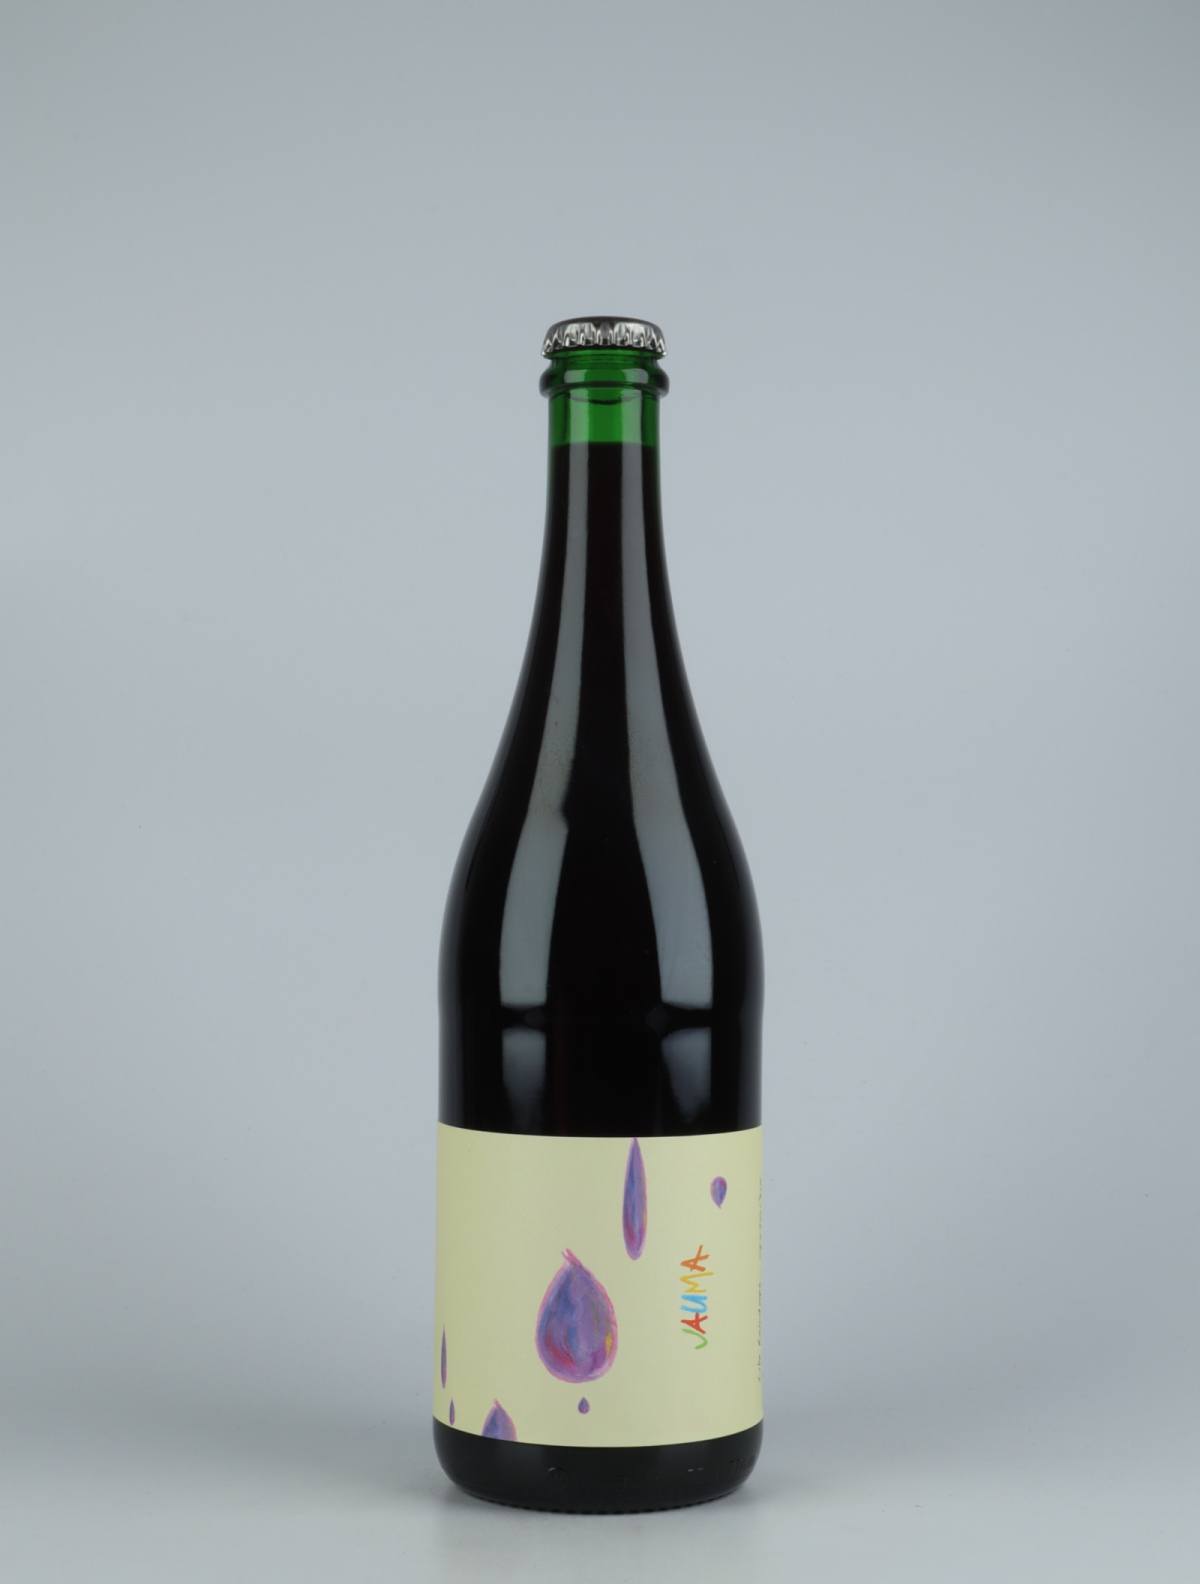 A bottle 2020 Like Raindrops Red wine from Jauma, Adelaide Hills in 